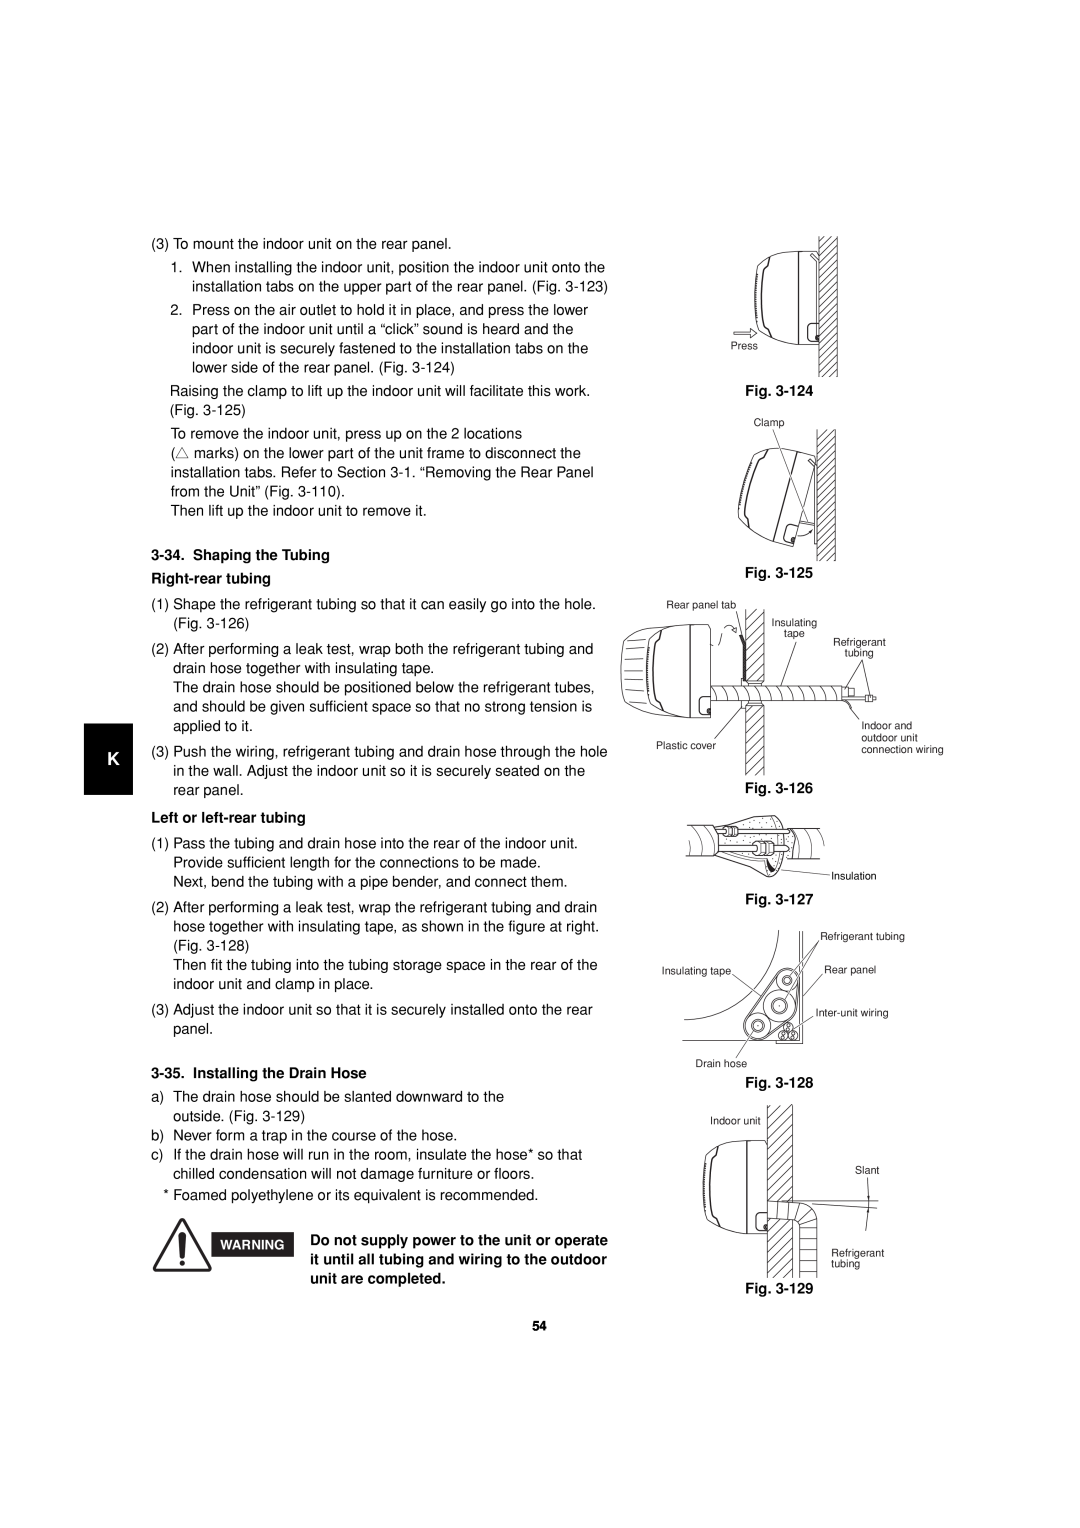 Sanyo 85464359981002 Shaping the Tubing, Right-reartubing, Left or left-reartubing, Installing the Drain Hose, Fig 